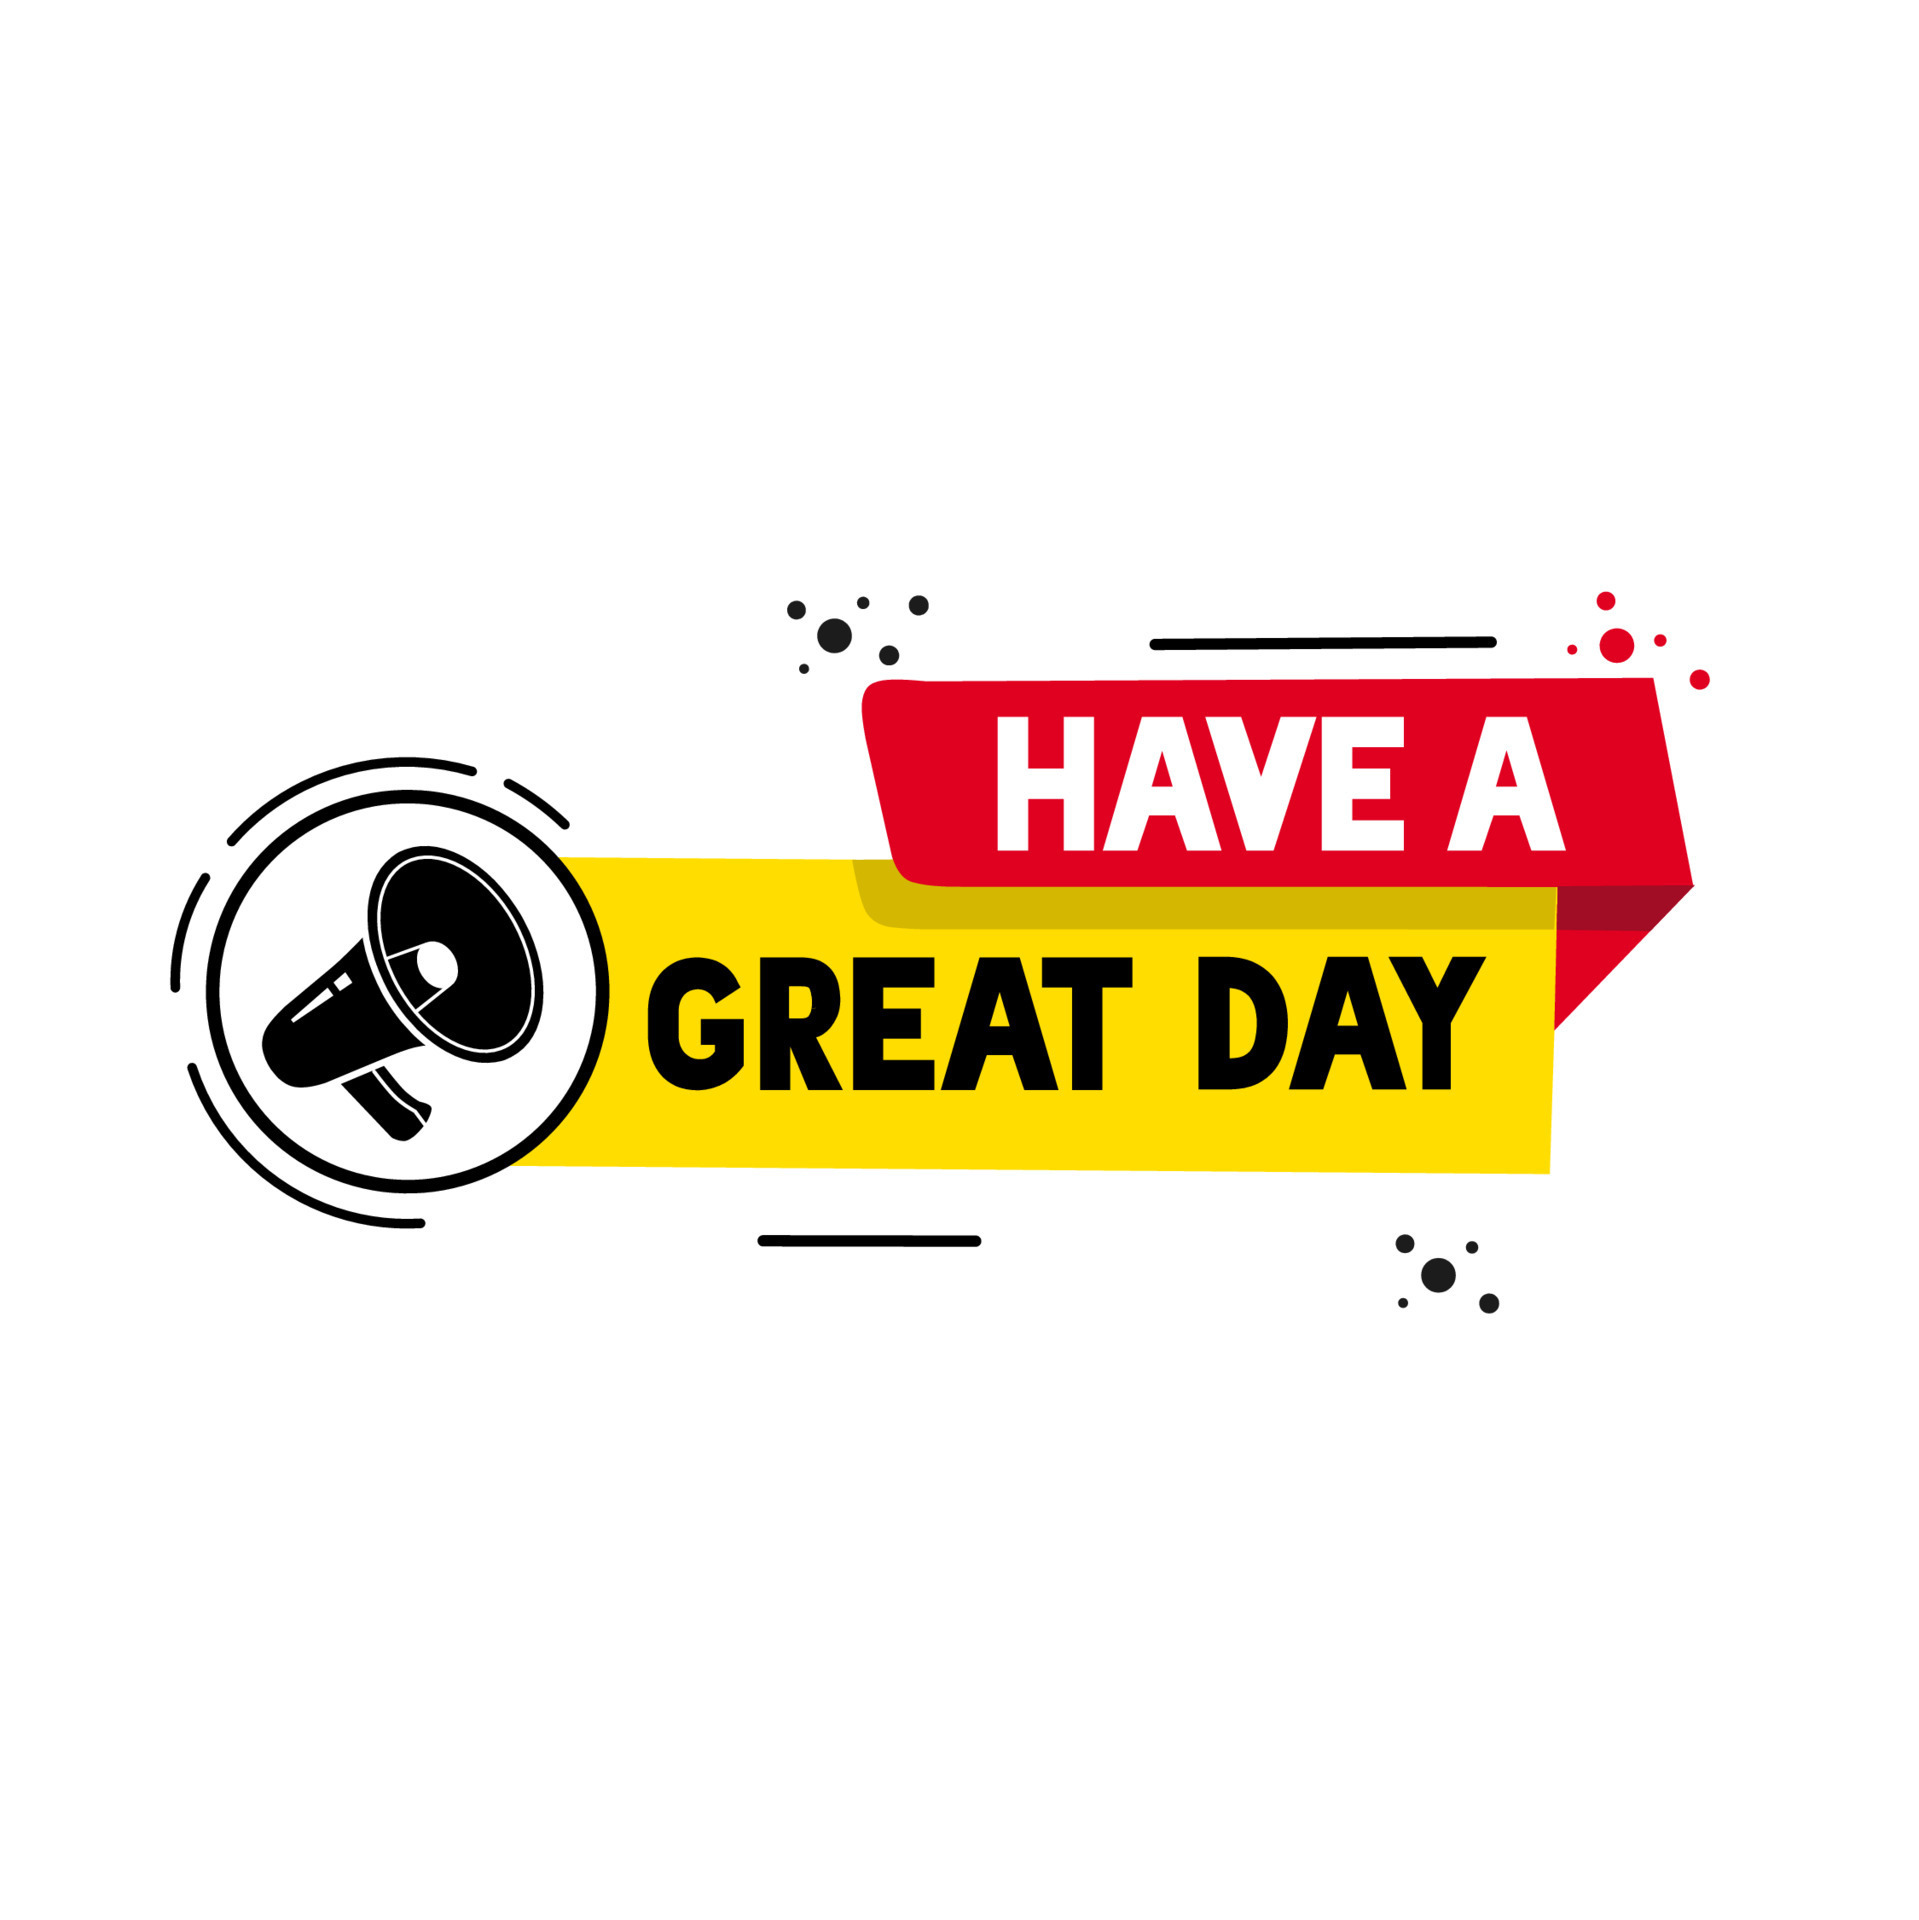 Have a great day banner message icon. Vector motivation quote